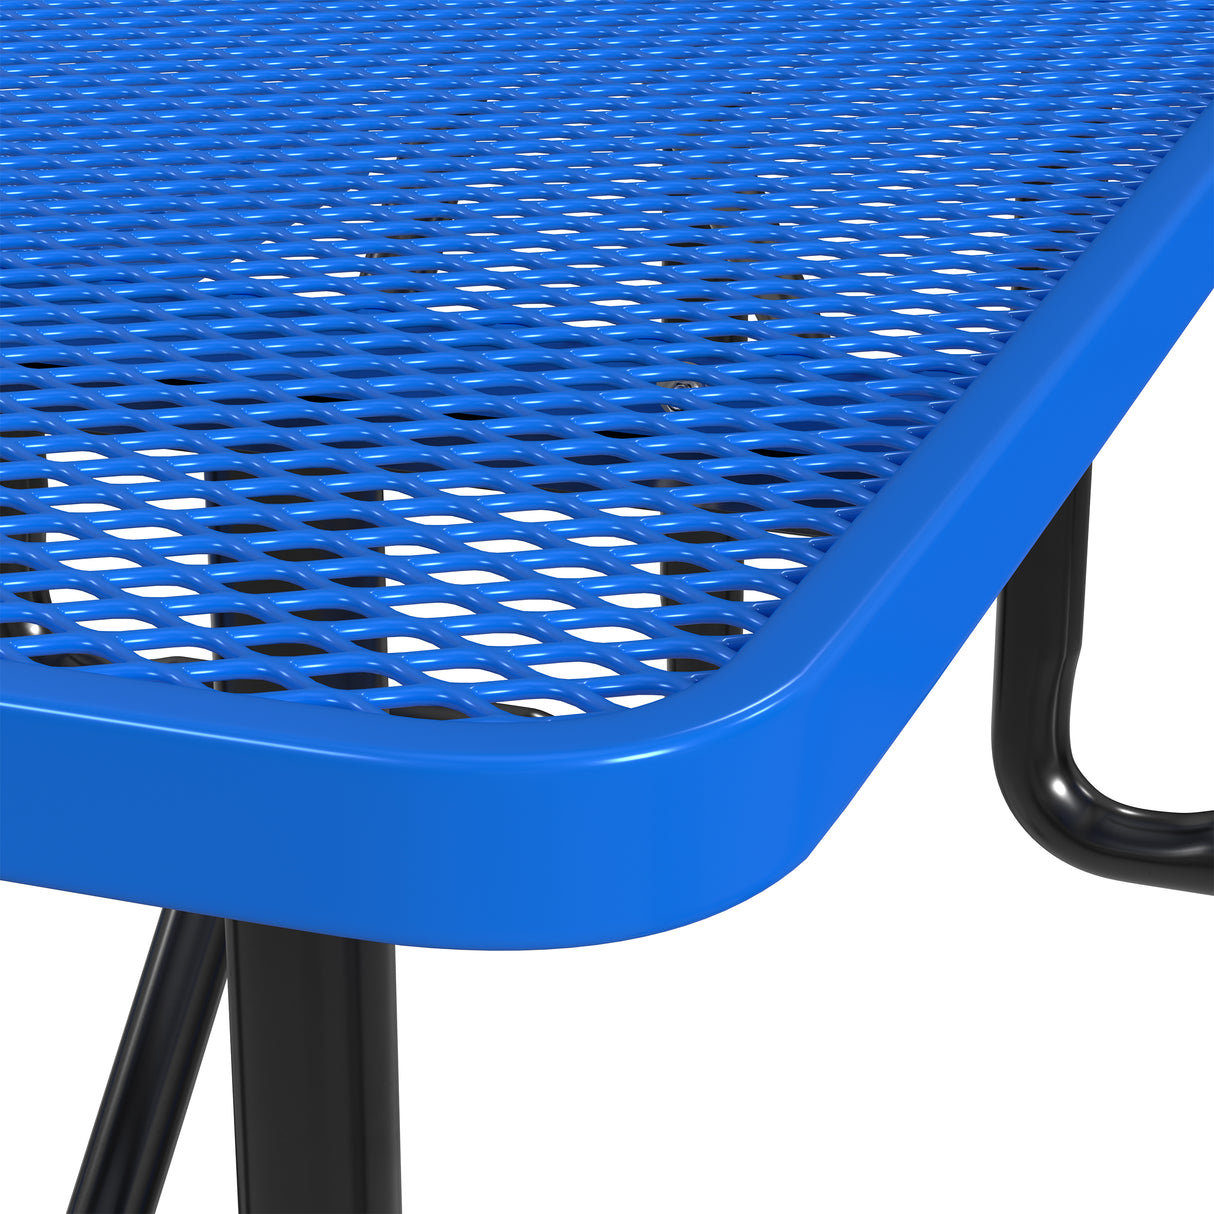 Quick Ship T6XPP 6 Foot Expanded Metal Picnic Table